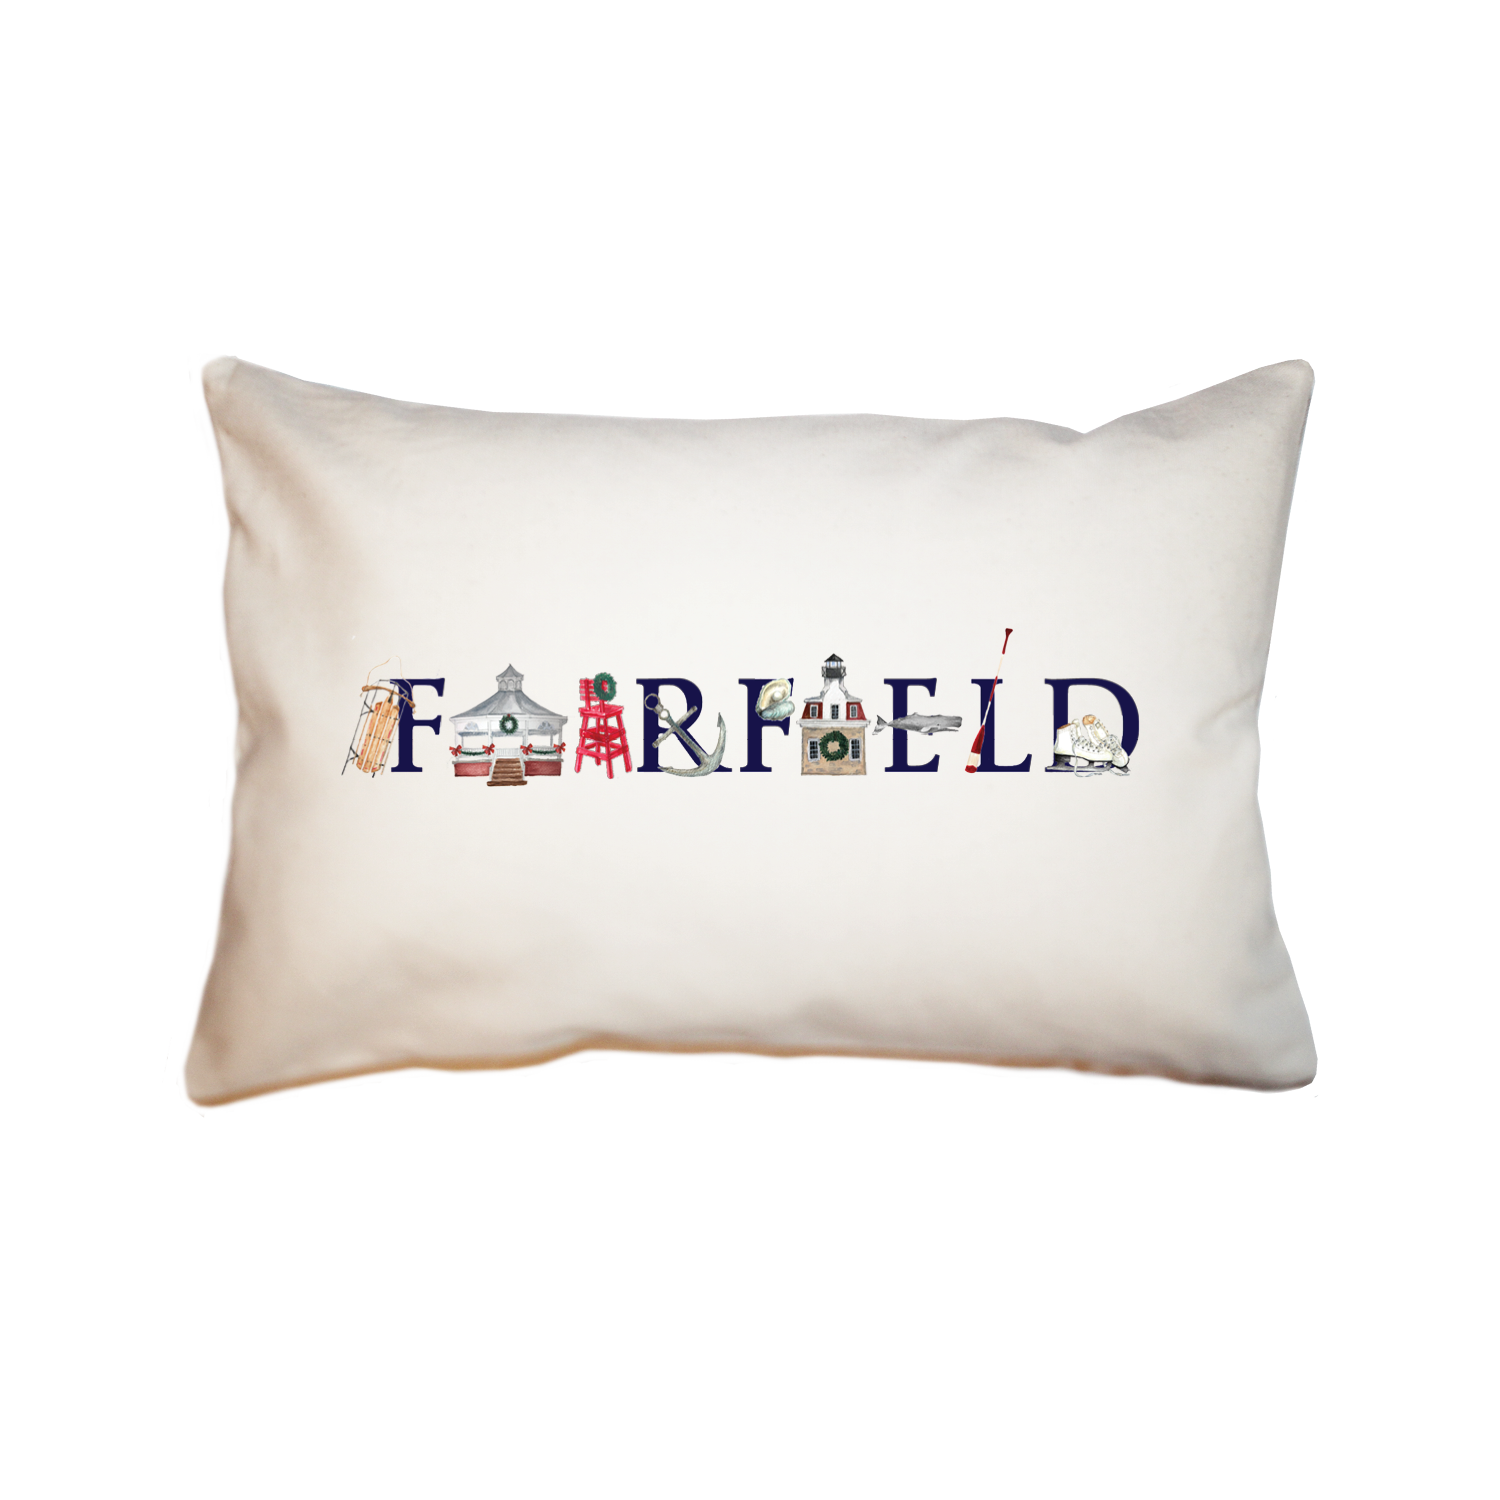 fairfield ct holiday large rectangle pillow